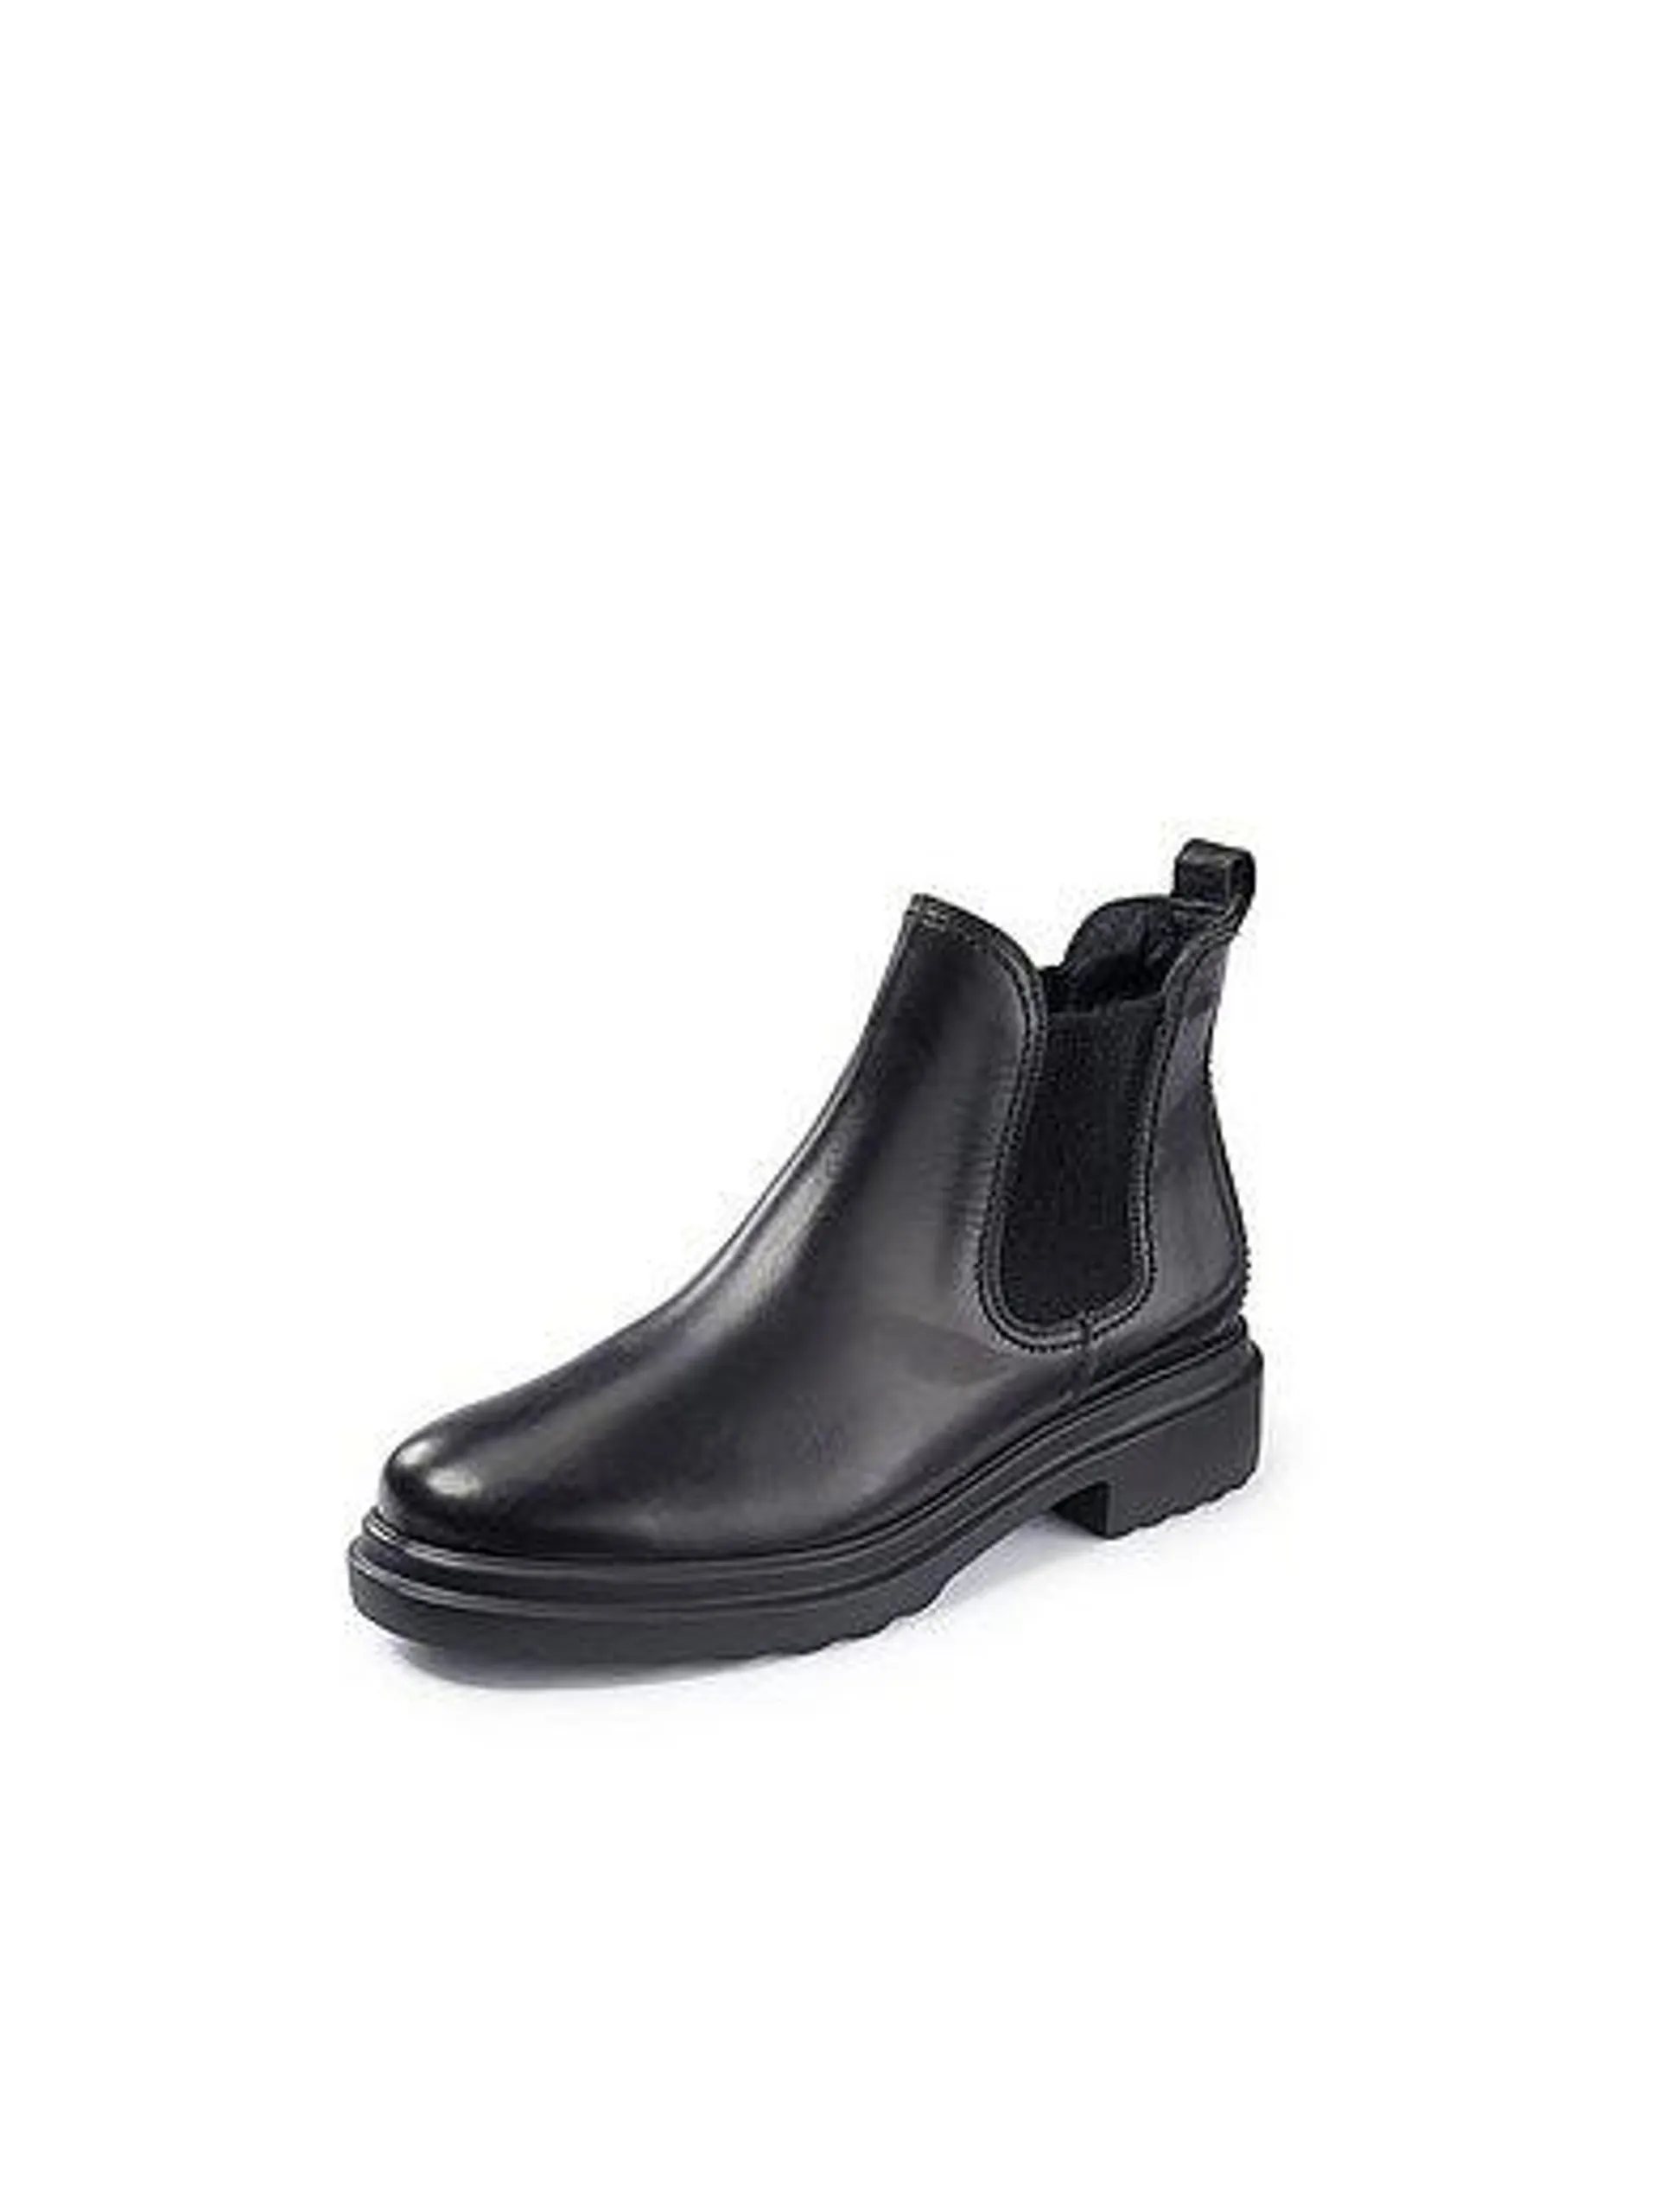 Chelsea boots in calf leather